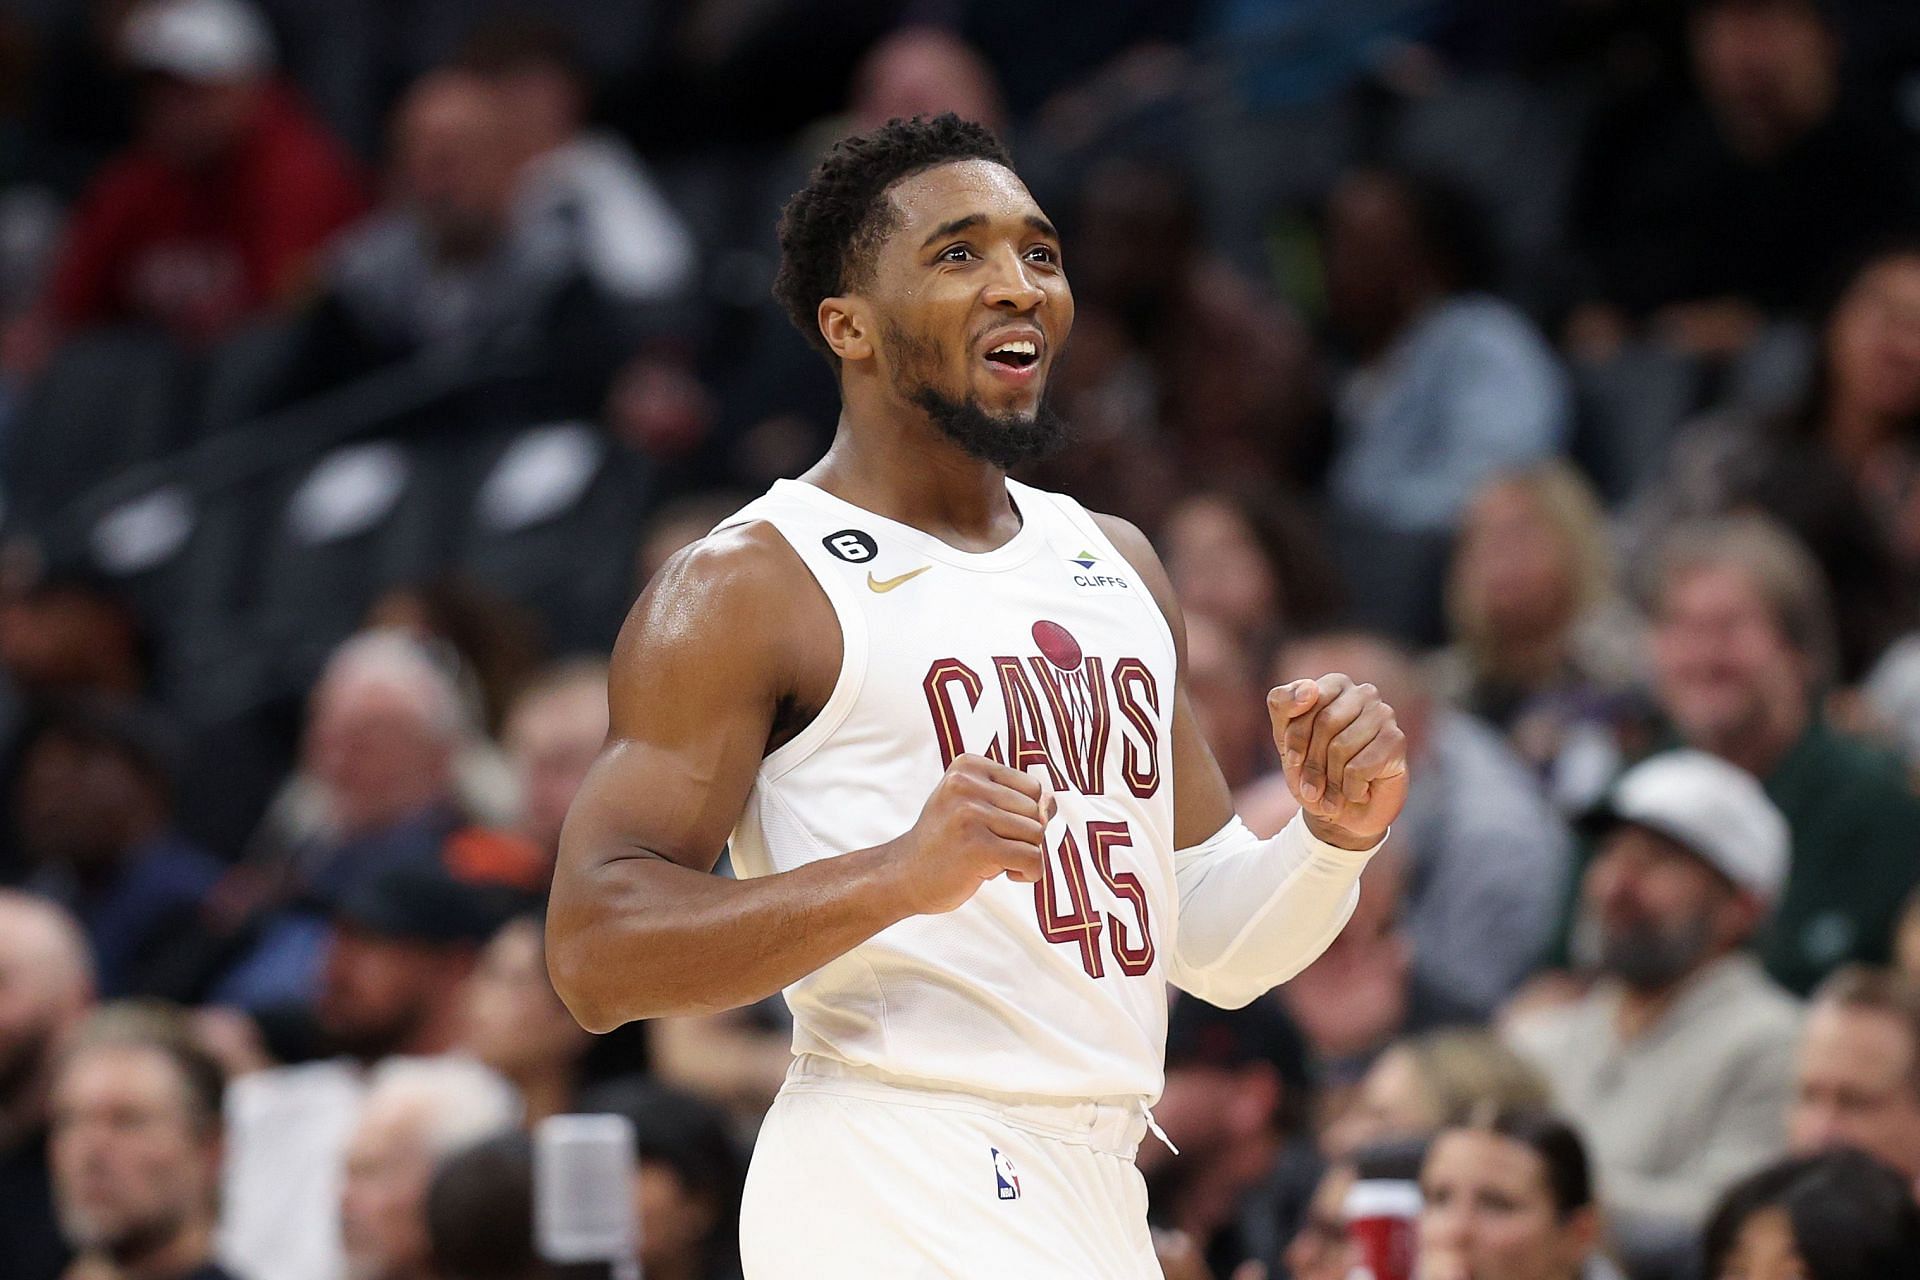 Cleveland Cavaliers All-Star guard Donovan Mitchell has displayed MVP-level form for his new team